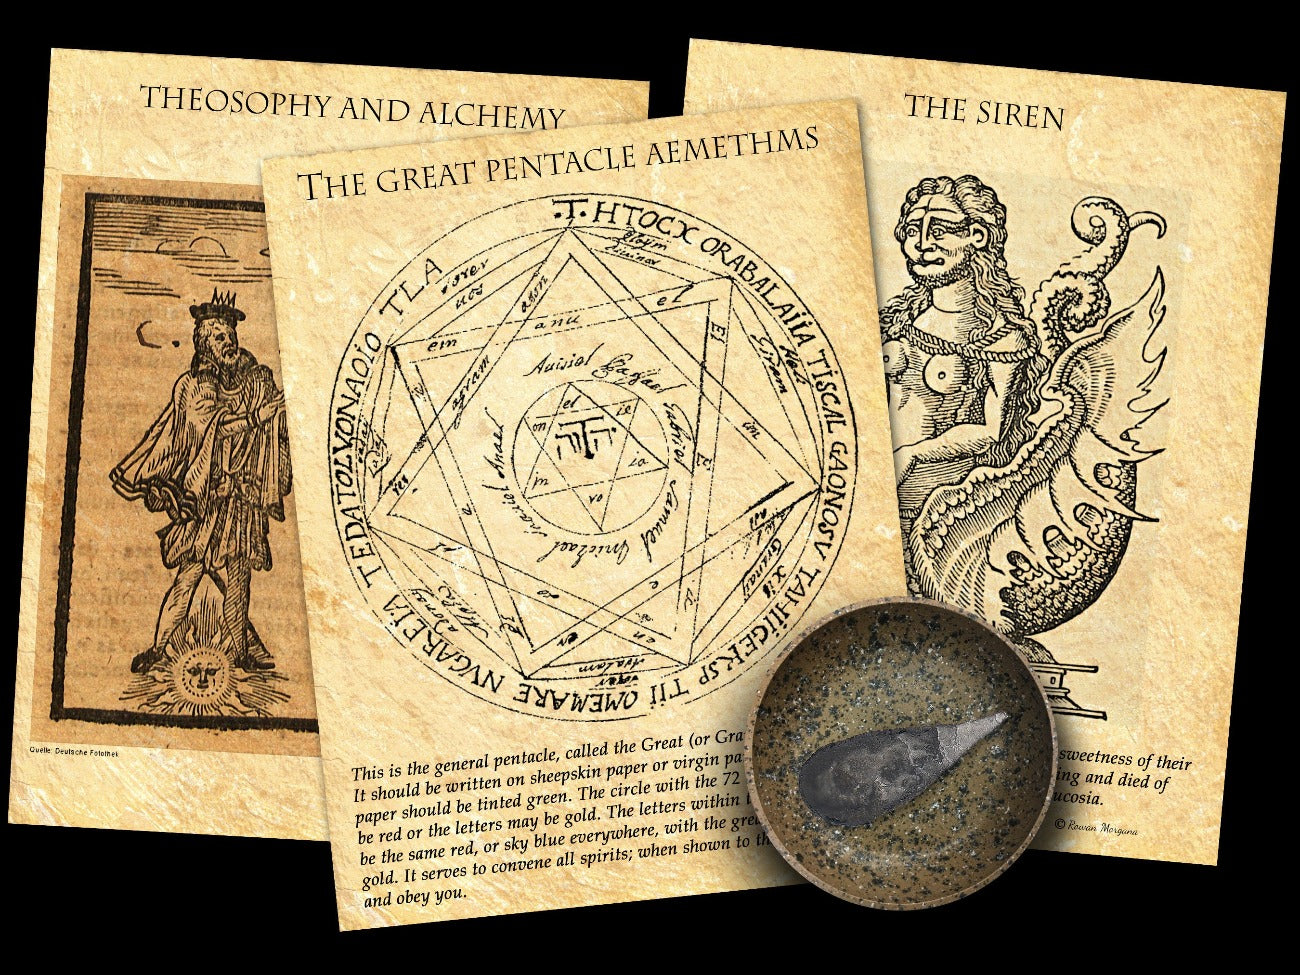 Theosophy and Alchemy, The Siren, and The Great Pentacle Aemethms pages.